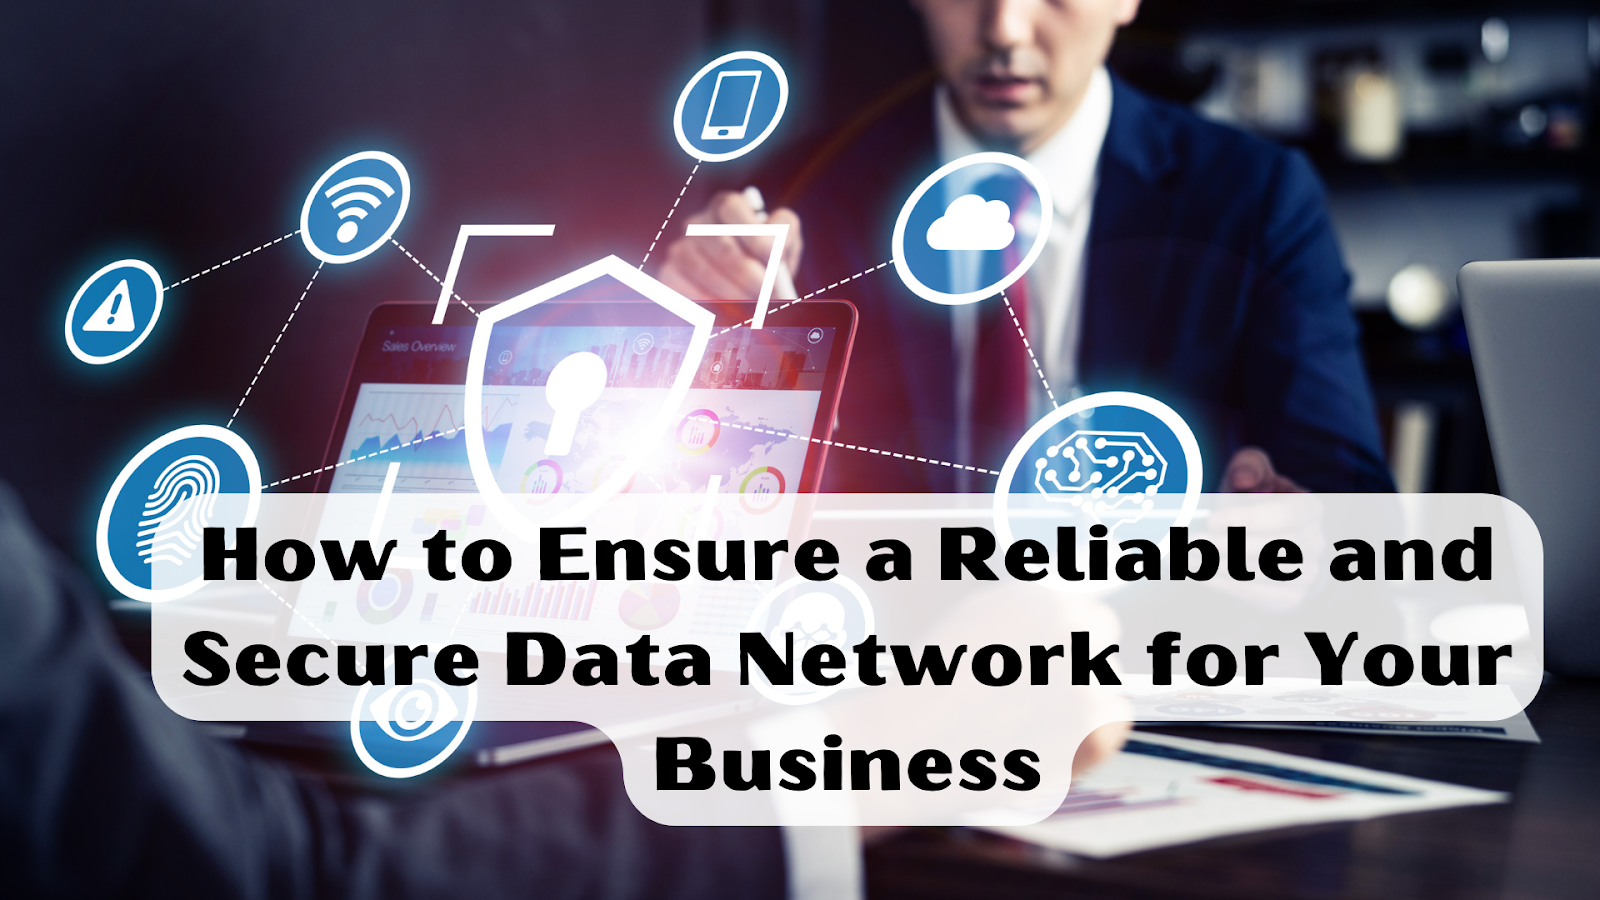 How to Ensure a Reliable and Secure Data Network for Your Business